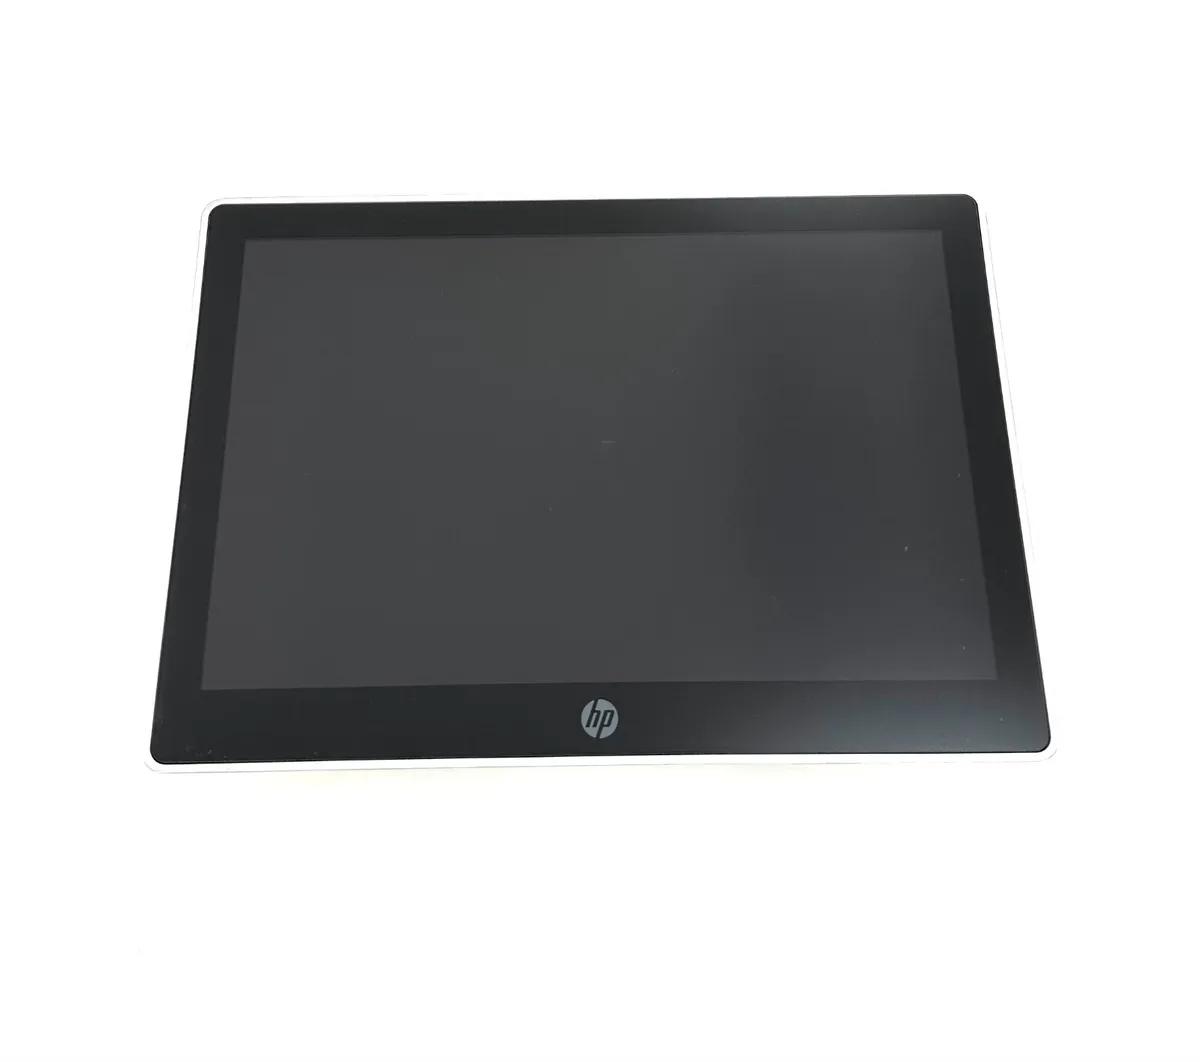 L7016t 15.6-inch Retail Touch Monitor